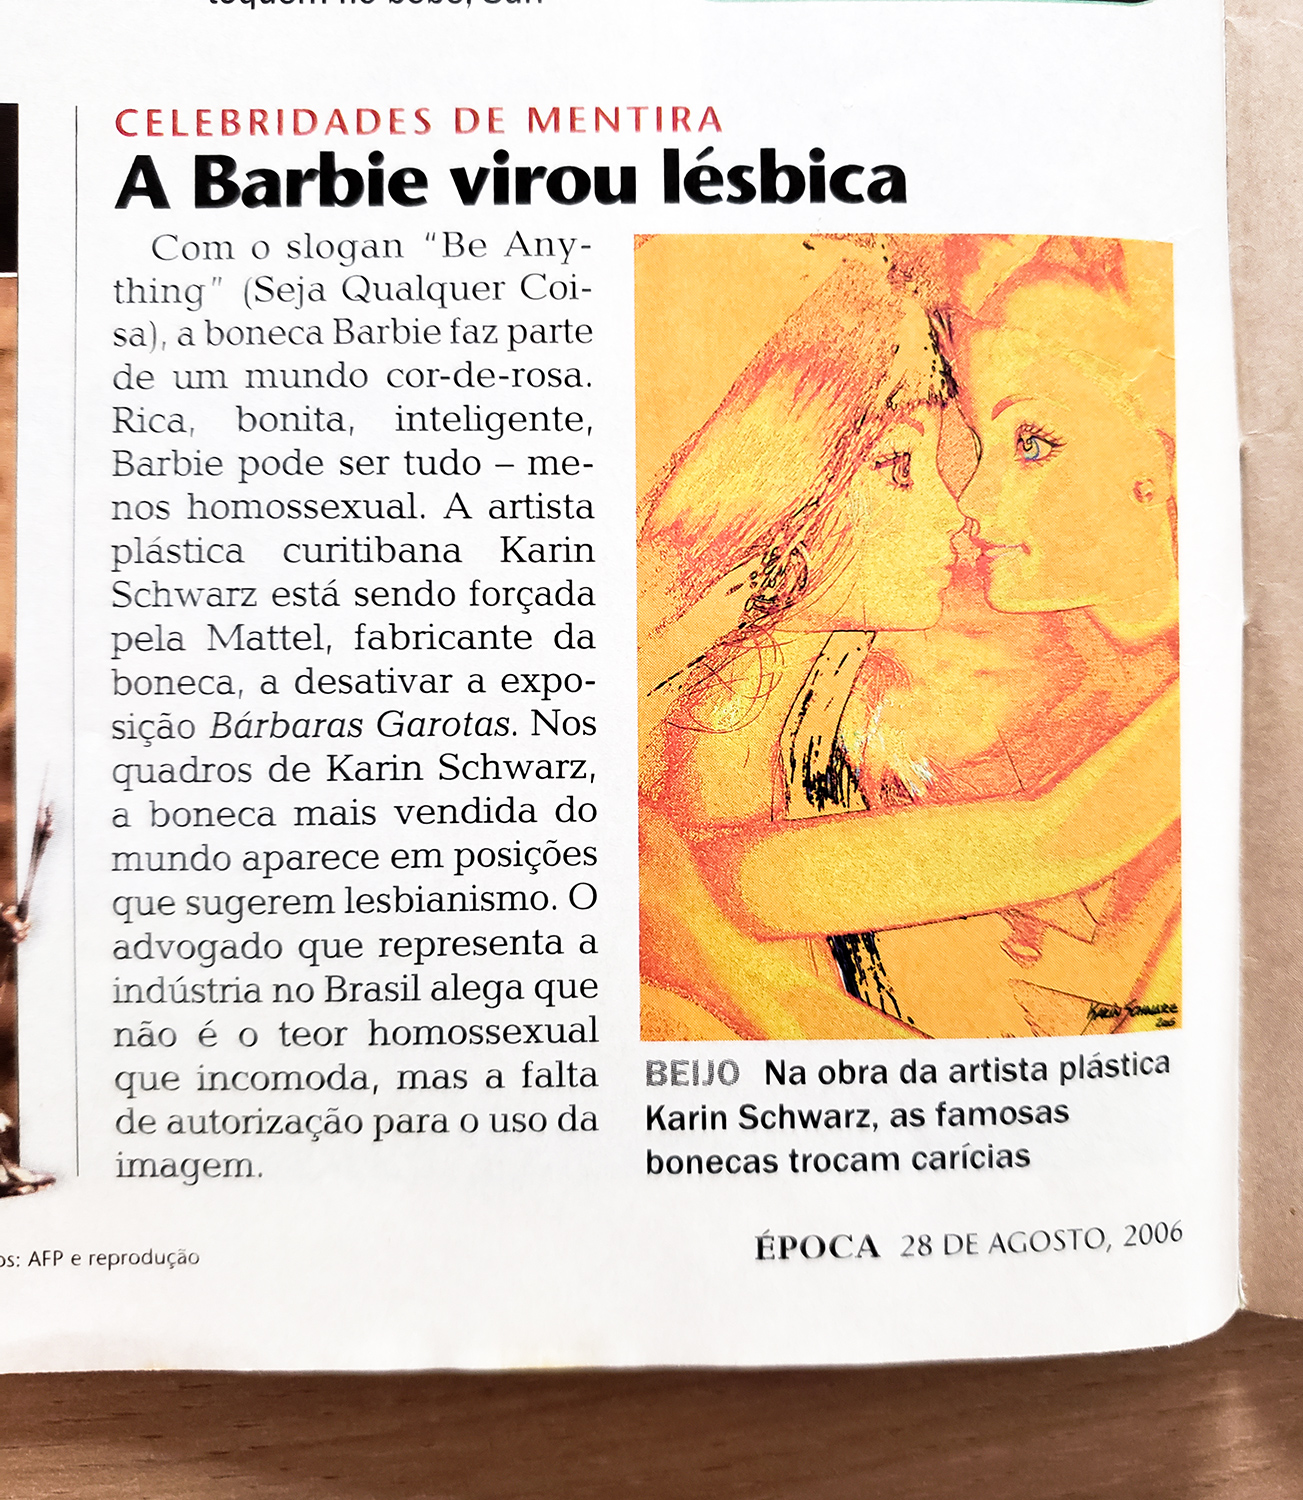 NEWS ABOUT THE CONTROVERSY (year 2006) ON THE INCOMPRESSIBLE INTENTION OF CENSURING THE "AMAZING GIRLS" SERIES, created by the brasilian artist KARIN SCHWARZ.